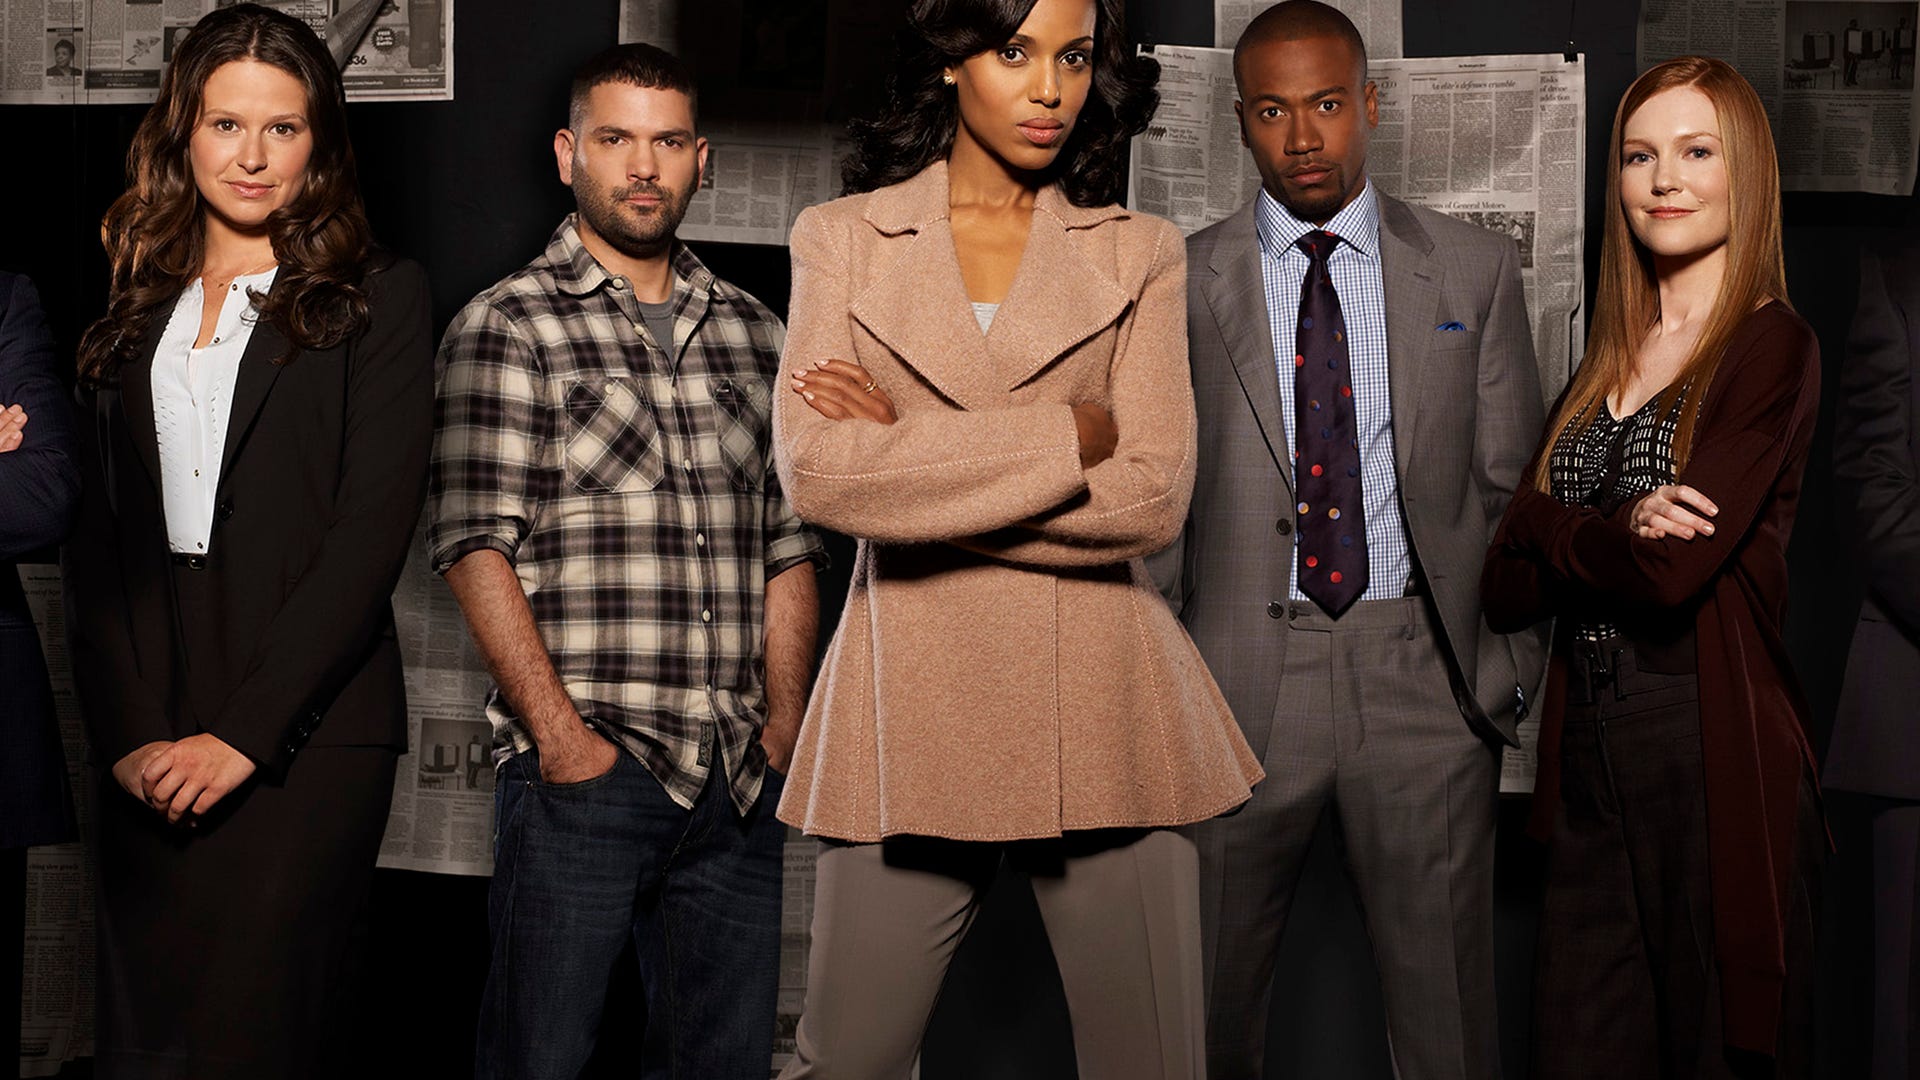 Katie Lowes, Guillermo Diaz, Kerry Washington, Columbus Short, Darby Stanchfield, Scandal